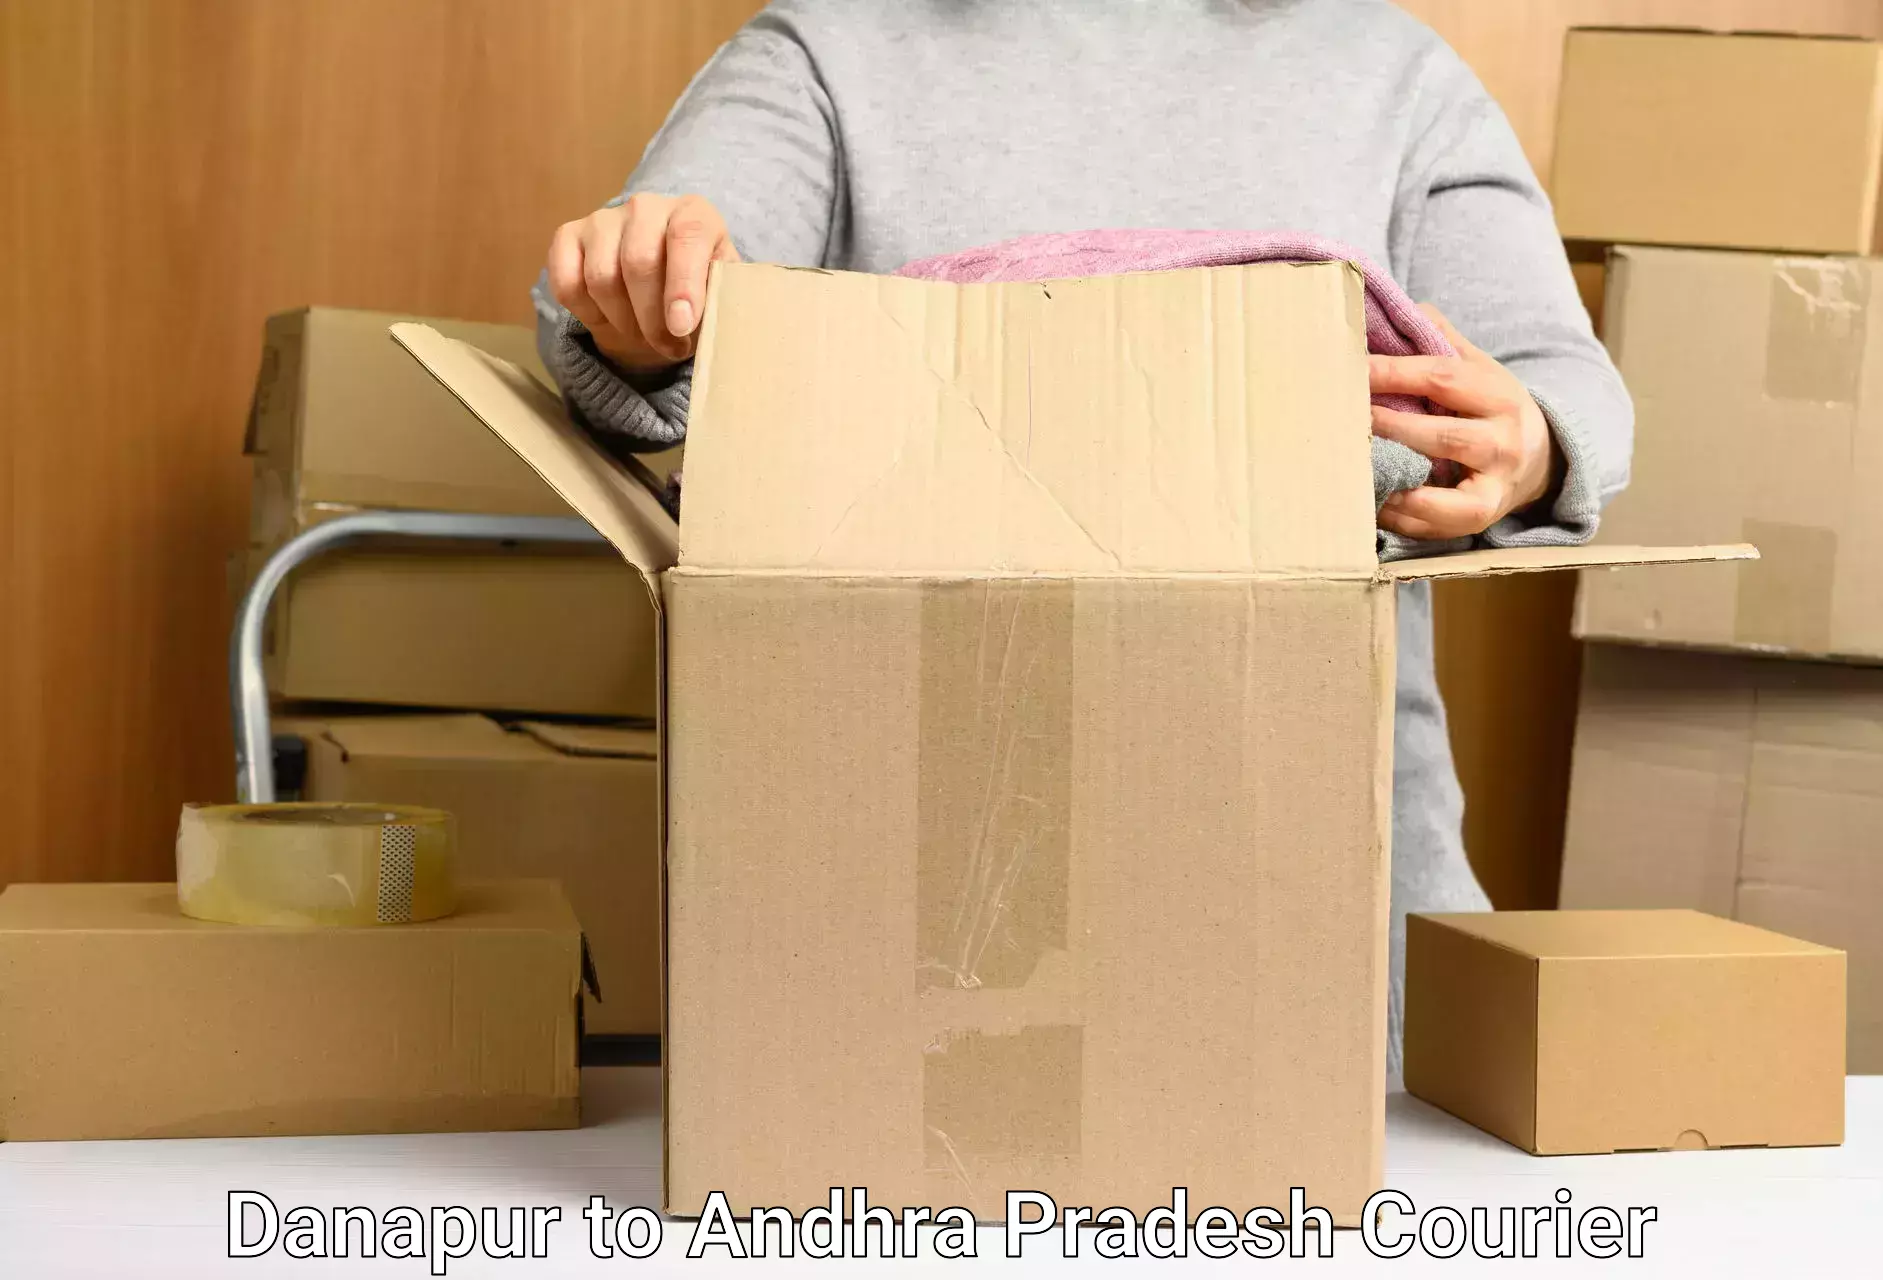 Easy access courier services in Danapur to Nandikotkur